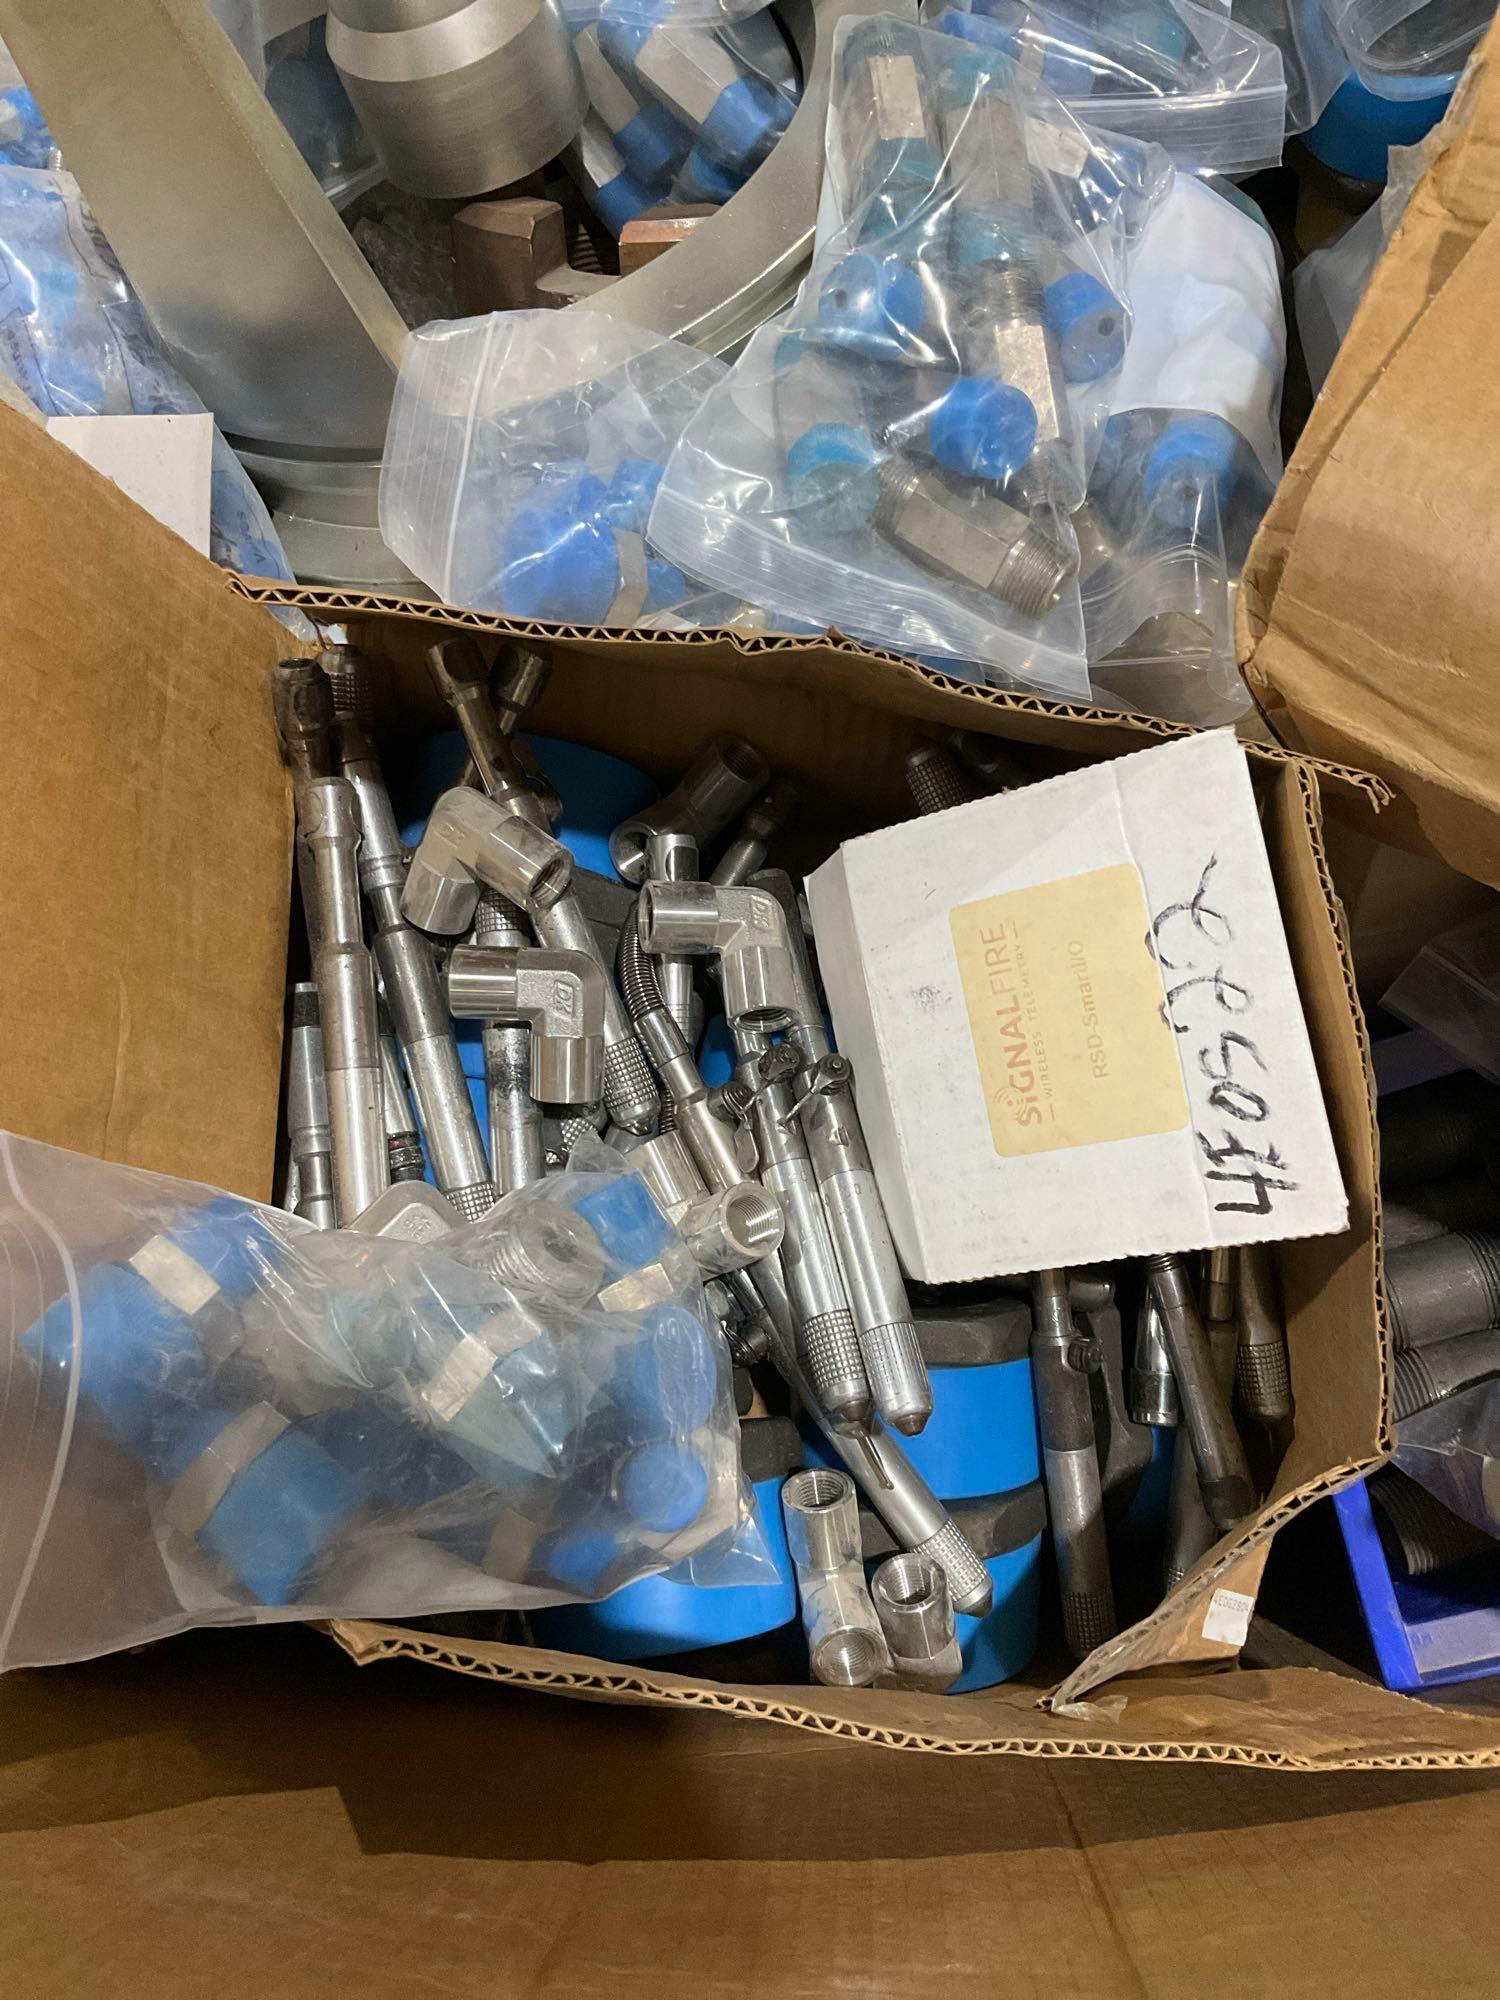 LOT OF MISCELLANEOUS TUBE FITTINGS, BATTERIES, CASTLE NUTS,...AND OTHER...EQUIPMENT